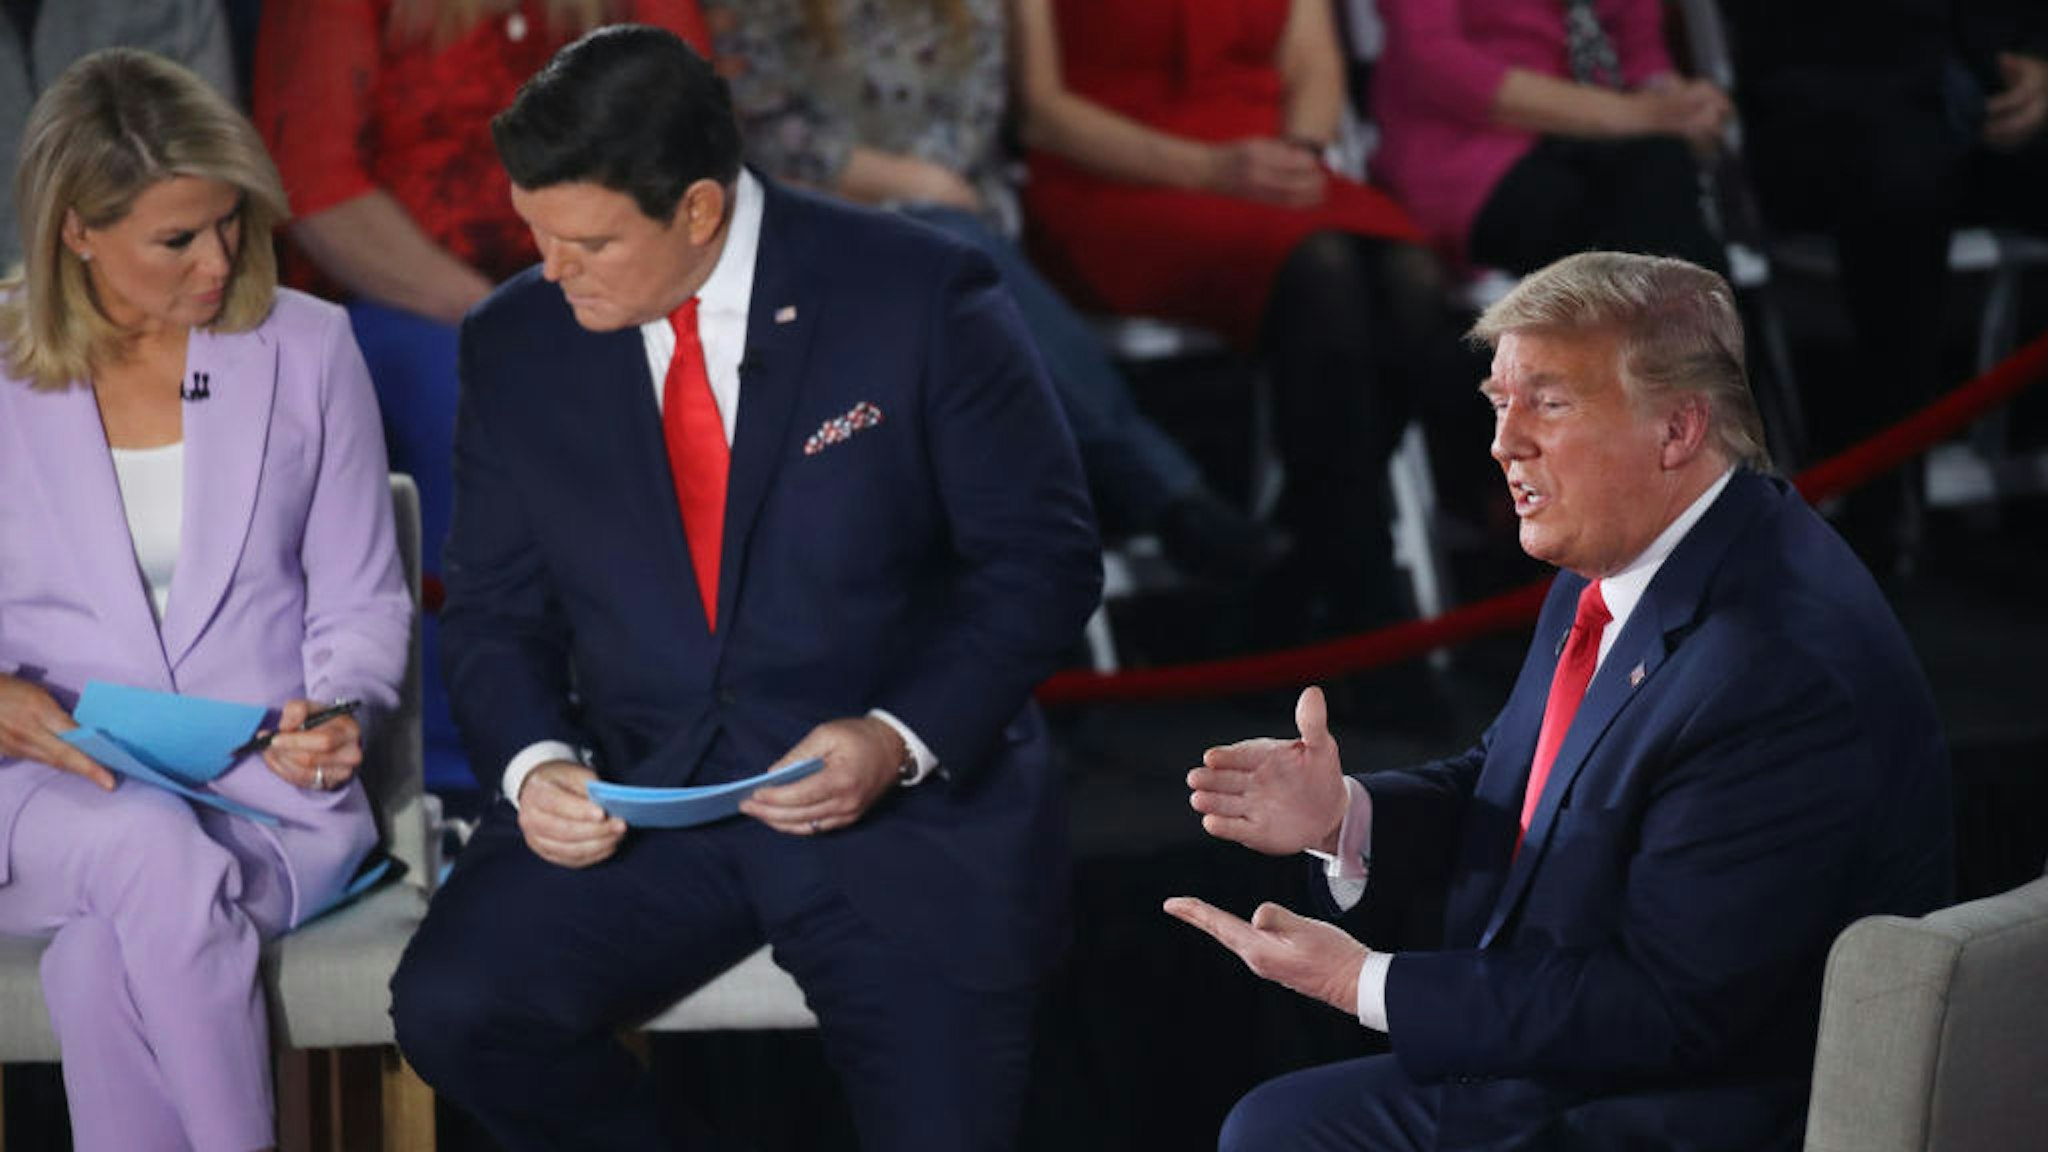 SCRANTON, PENNSYLVANIA - MARCH 05: President Donald Trump participates in a Fox News Town Hall event with moderators Bret Baier and Martha MacCallum on March 05, 2020 in Scranton, Pennsylvania. Among other topics, President Trump discussed his administration's response to the Coronavirus and the economy. (Photo by Spencer Platt/Getty Images)